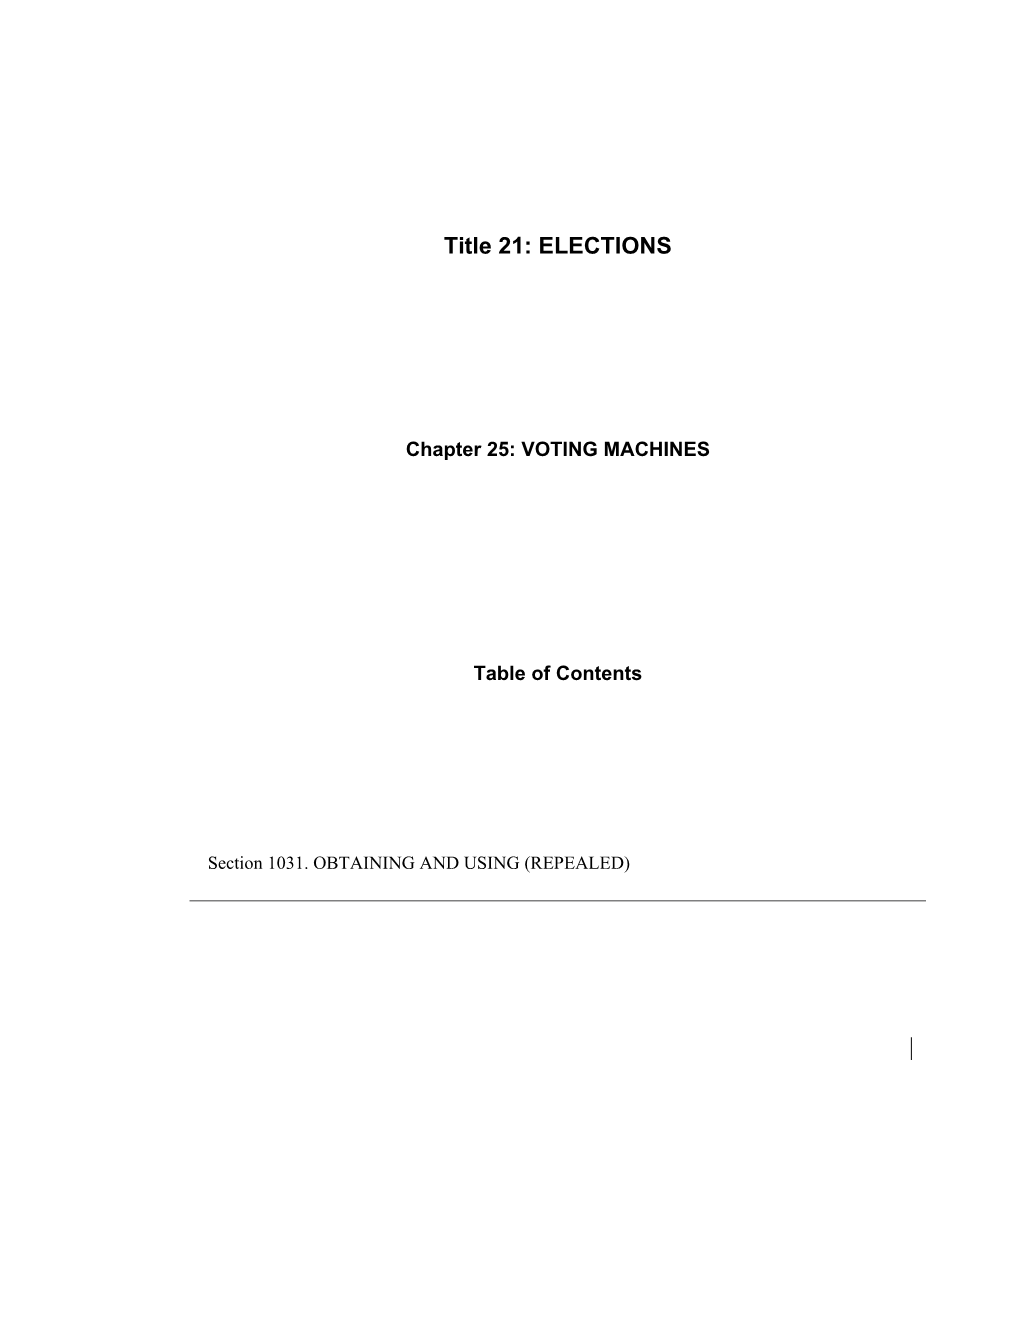 MRS Title 21, Chapter25: VOTING MACHINES